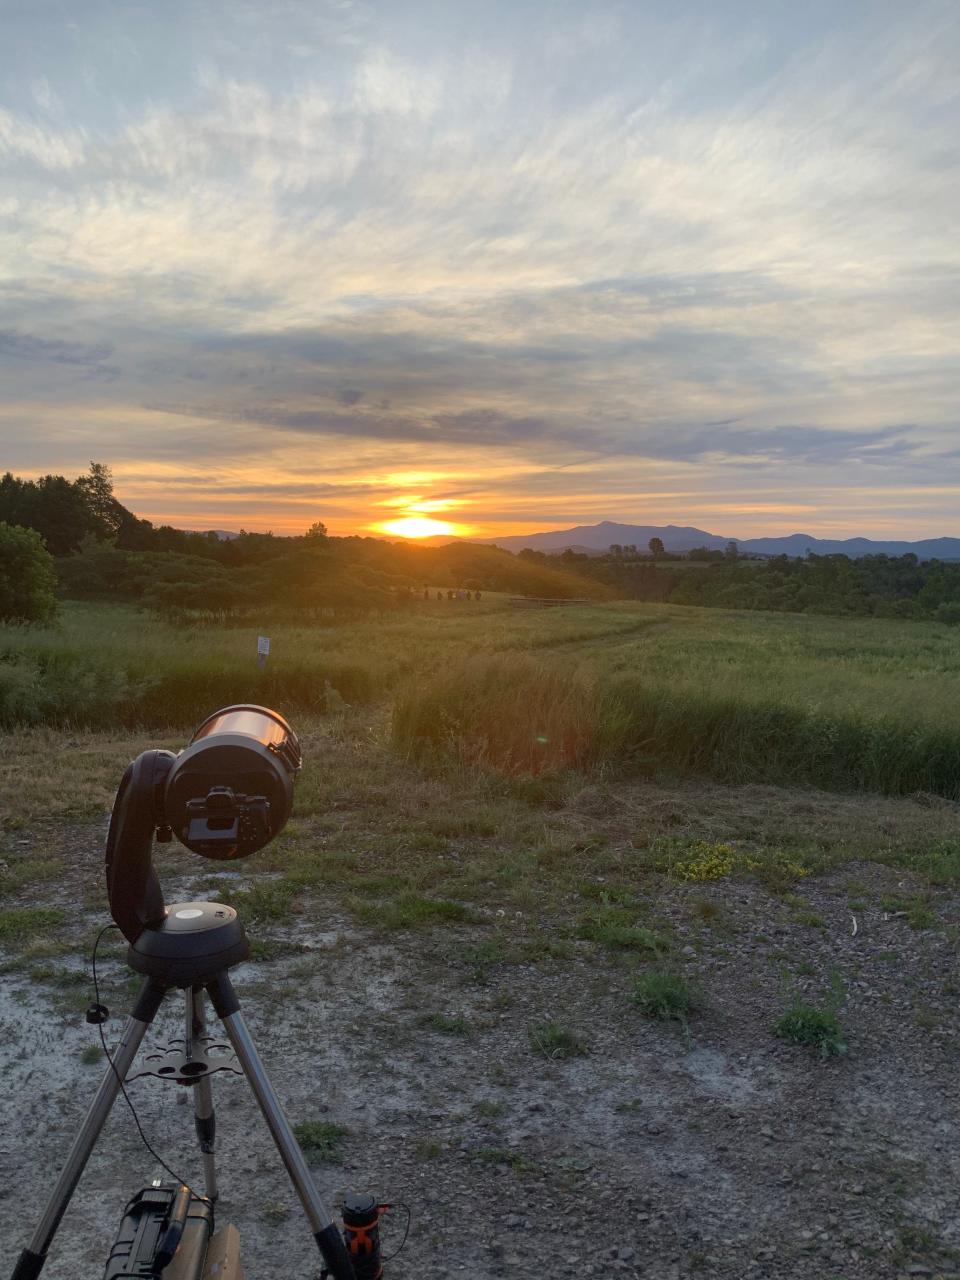 The Vermont Astronomical Society and others gathered at Wheeler Park for a sunrise celestial event. A partial solar eclipse brought out cameras and telescopes to South Burlington as dawn broke June 10, 2021.